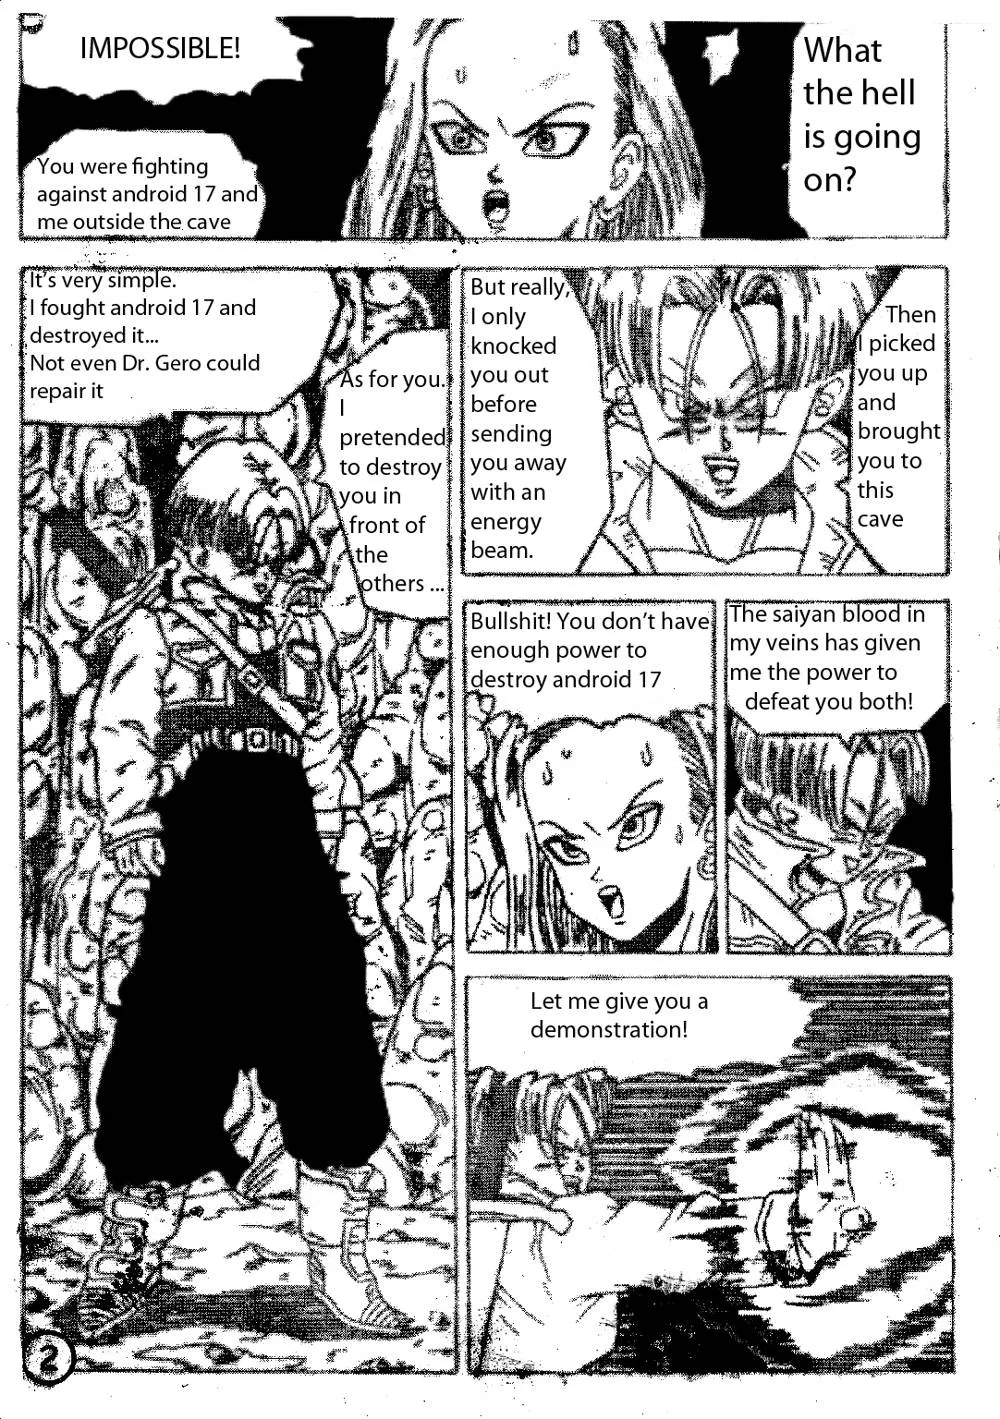 Dragon Ball Z,Trunks And Android 18 [English][第3页]